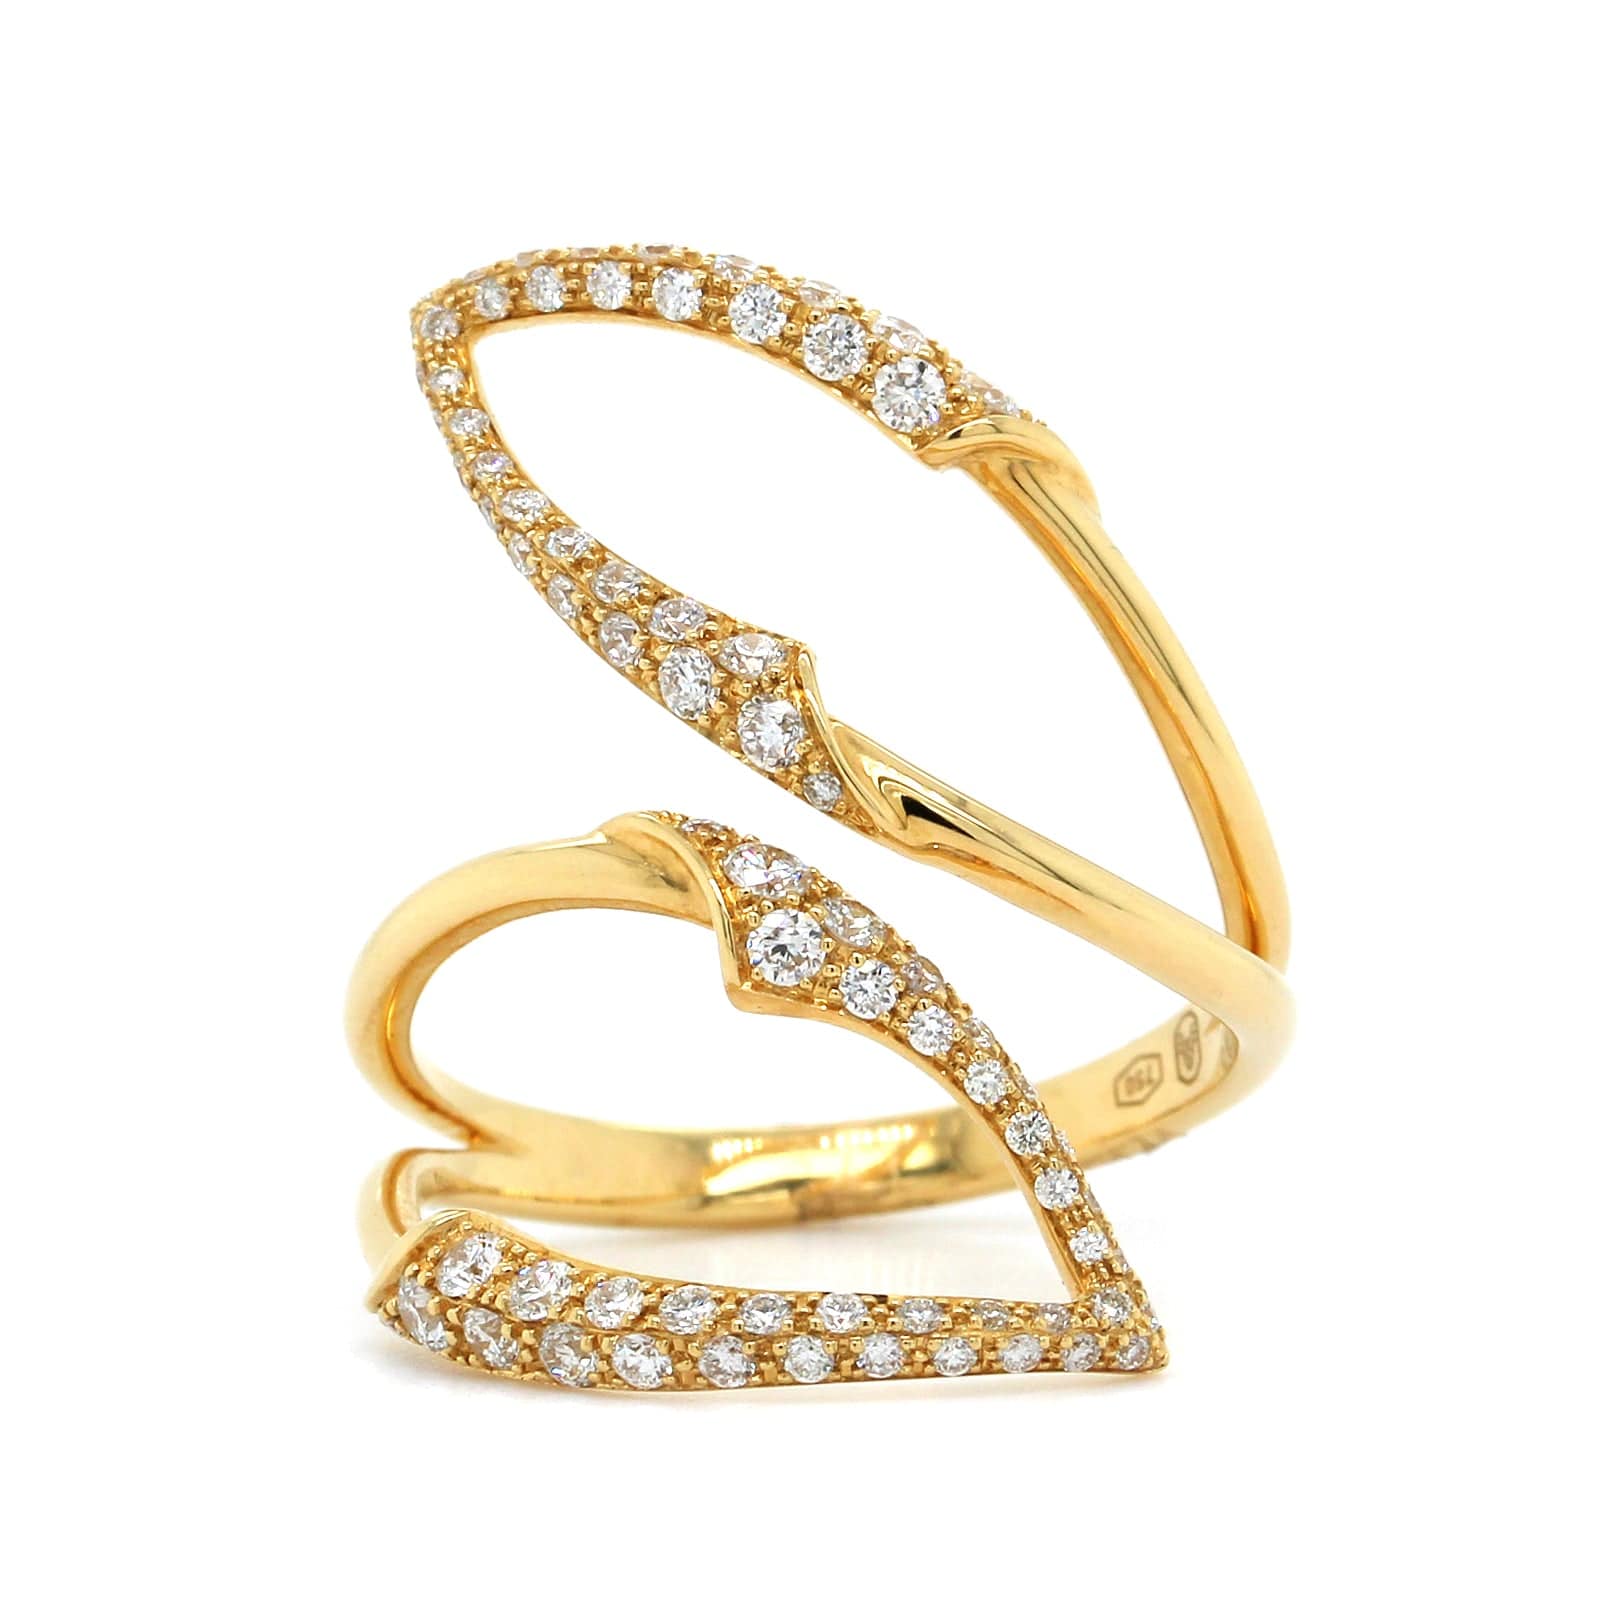 Etho Maria 18K Yellow Gold Pave Diamond Open Bypass Ring